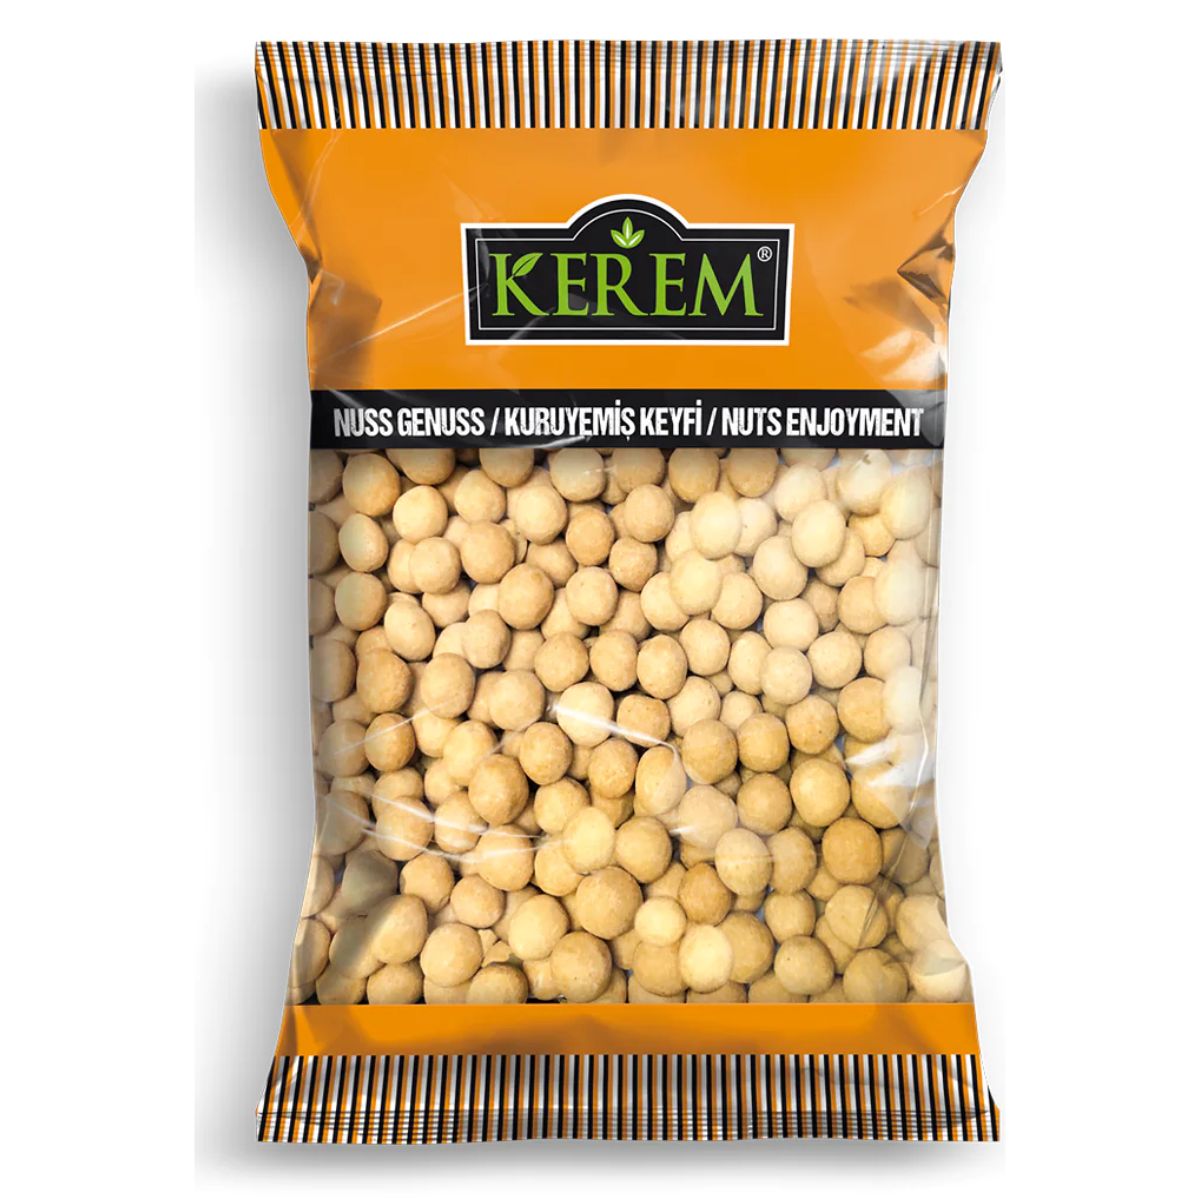 A package of Kerem brand nuts labeled "Kerem - Salted Yellow Chickpeas - 250g.